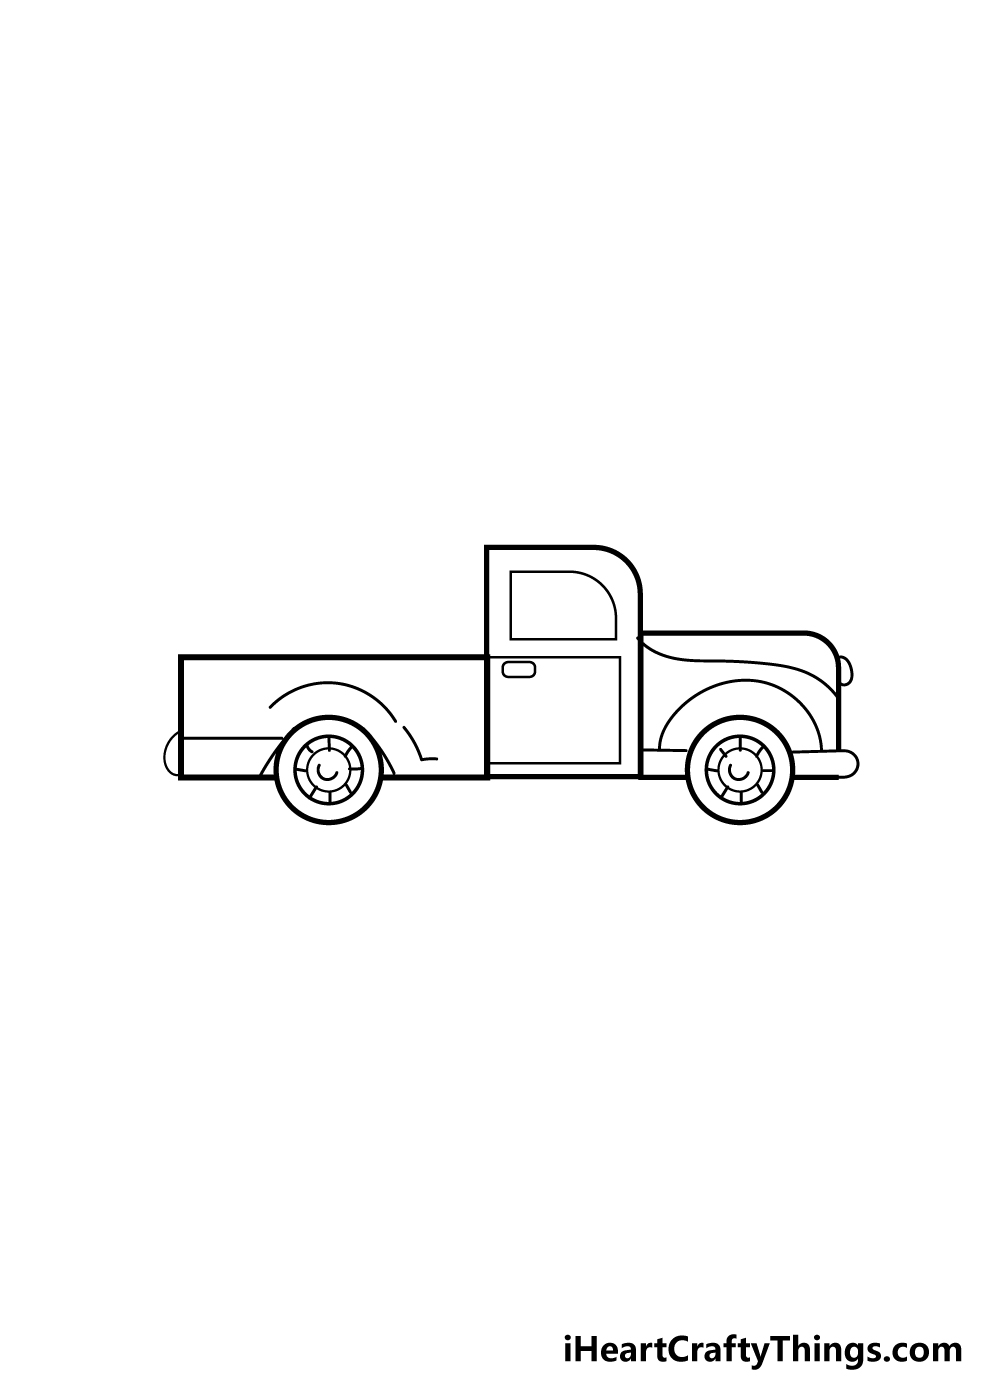 5 . step truck drawing